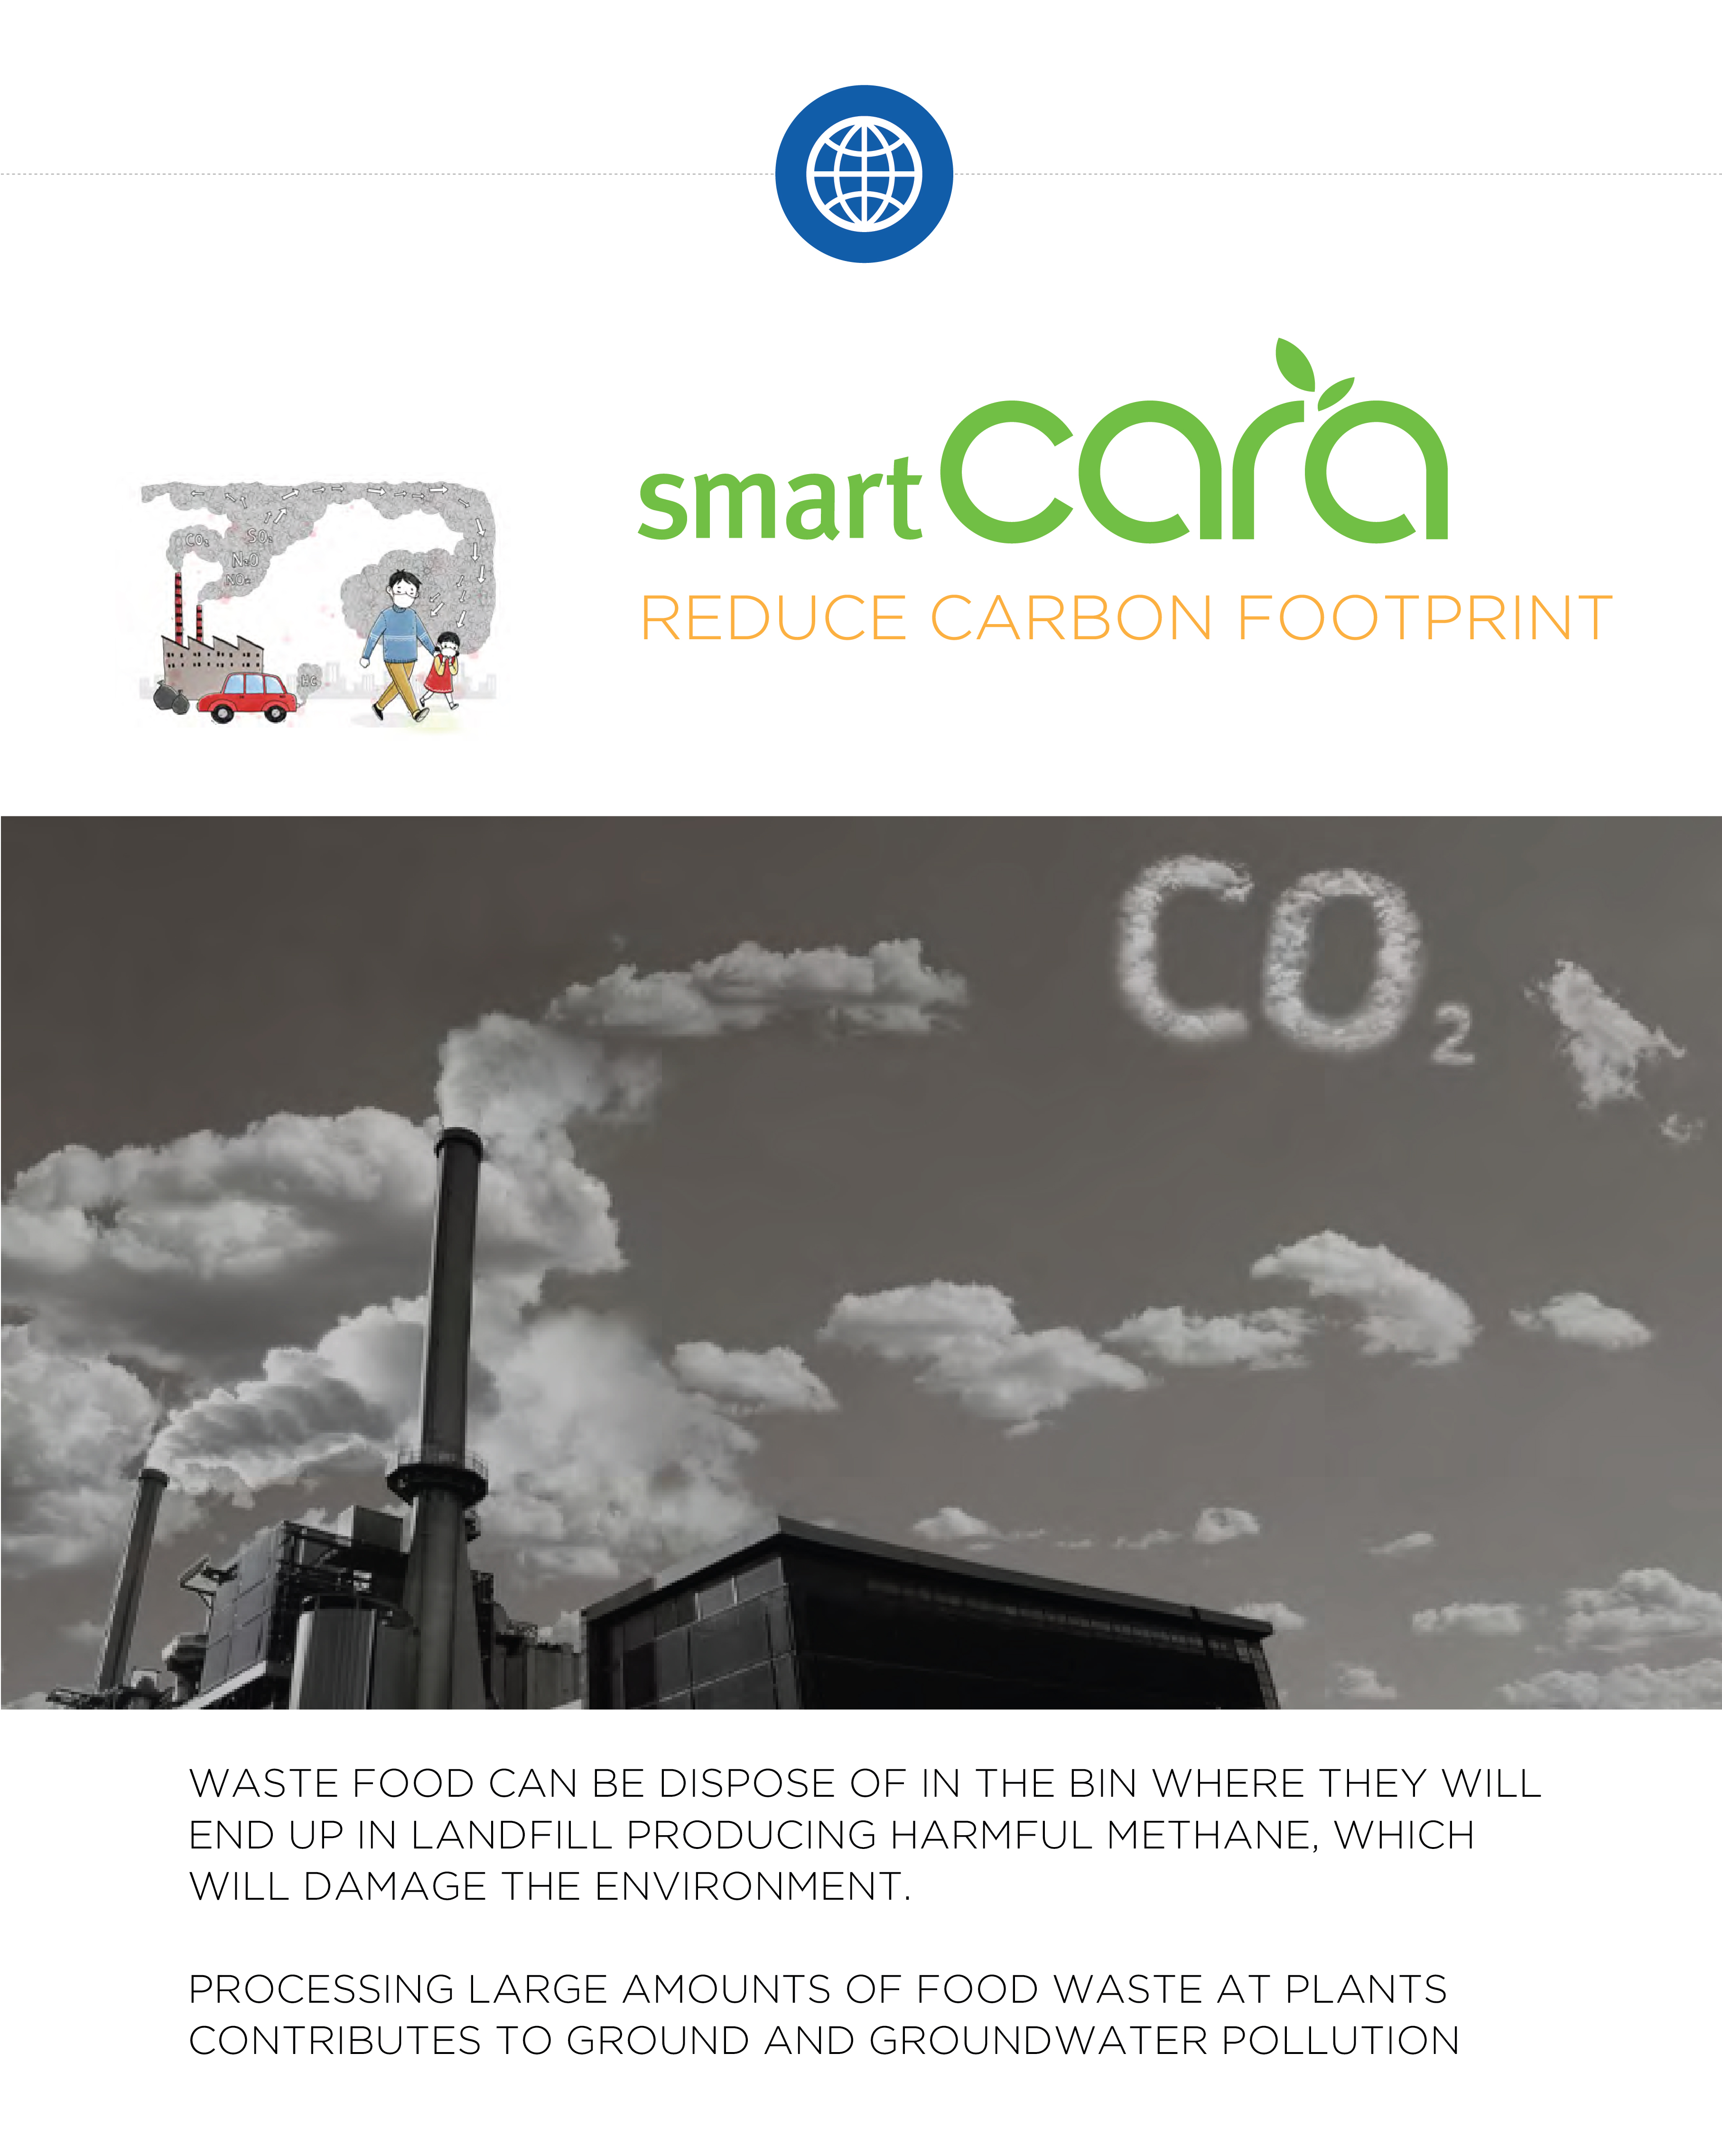 Smart Cara present state of the art food composter